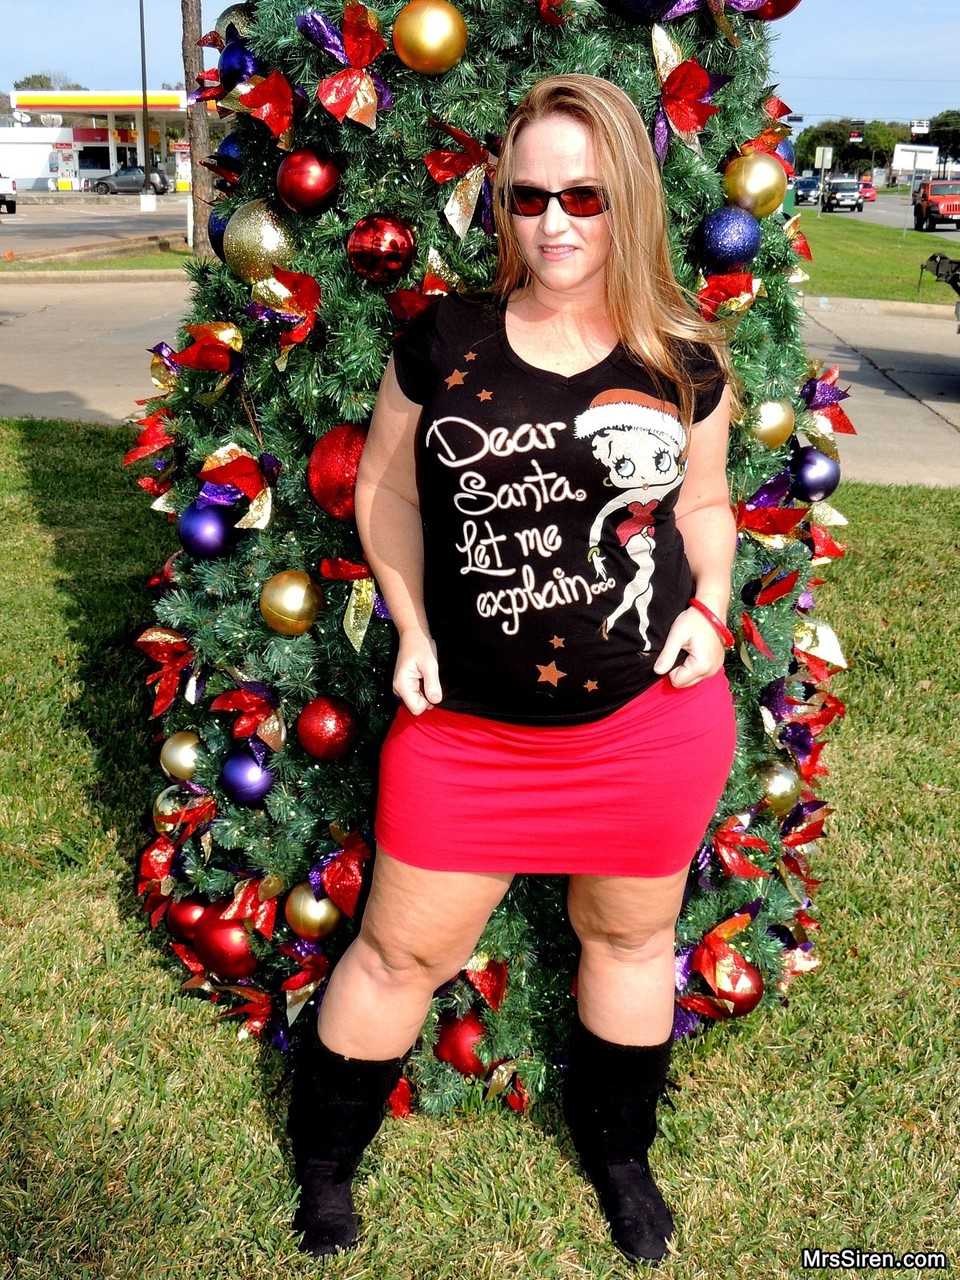 Thick MILF Dee Siren flashes her fat ass in front of a Xmas tree in public photo porno #424833329 | Mrs Siren Pics, Dee Siren, Wayne Siren, Chubby, porno mobile